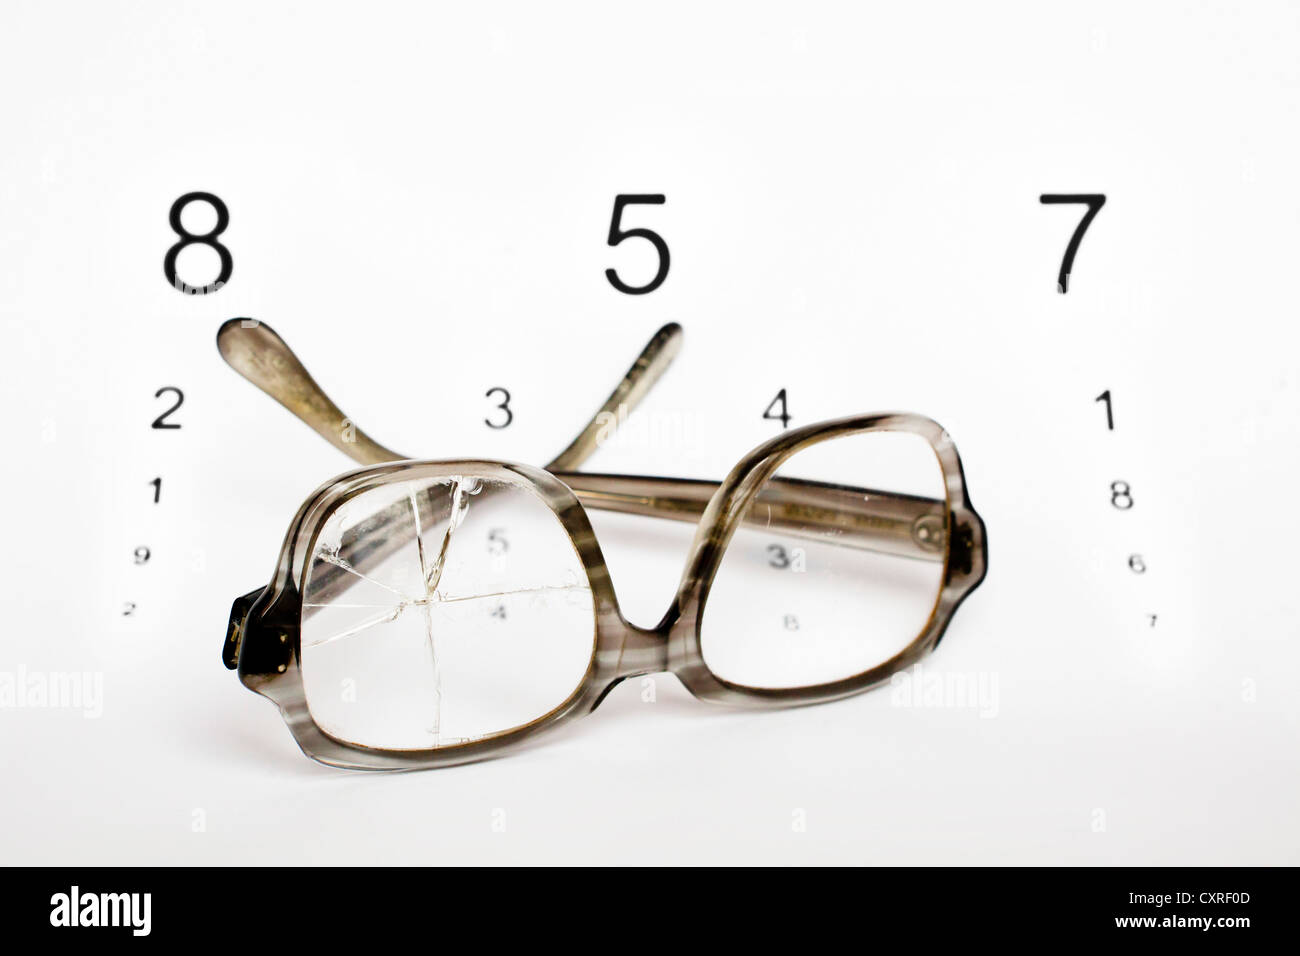 Old broken glasses with an eye test chart Stock Photo